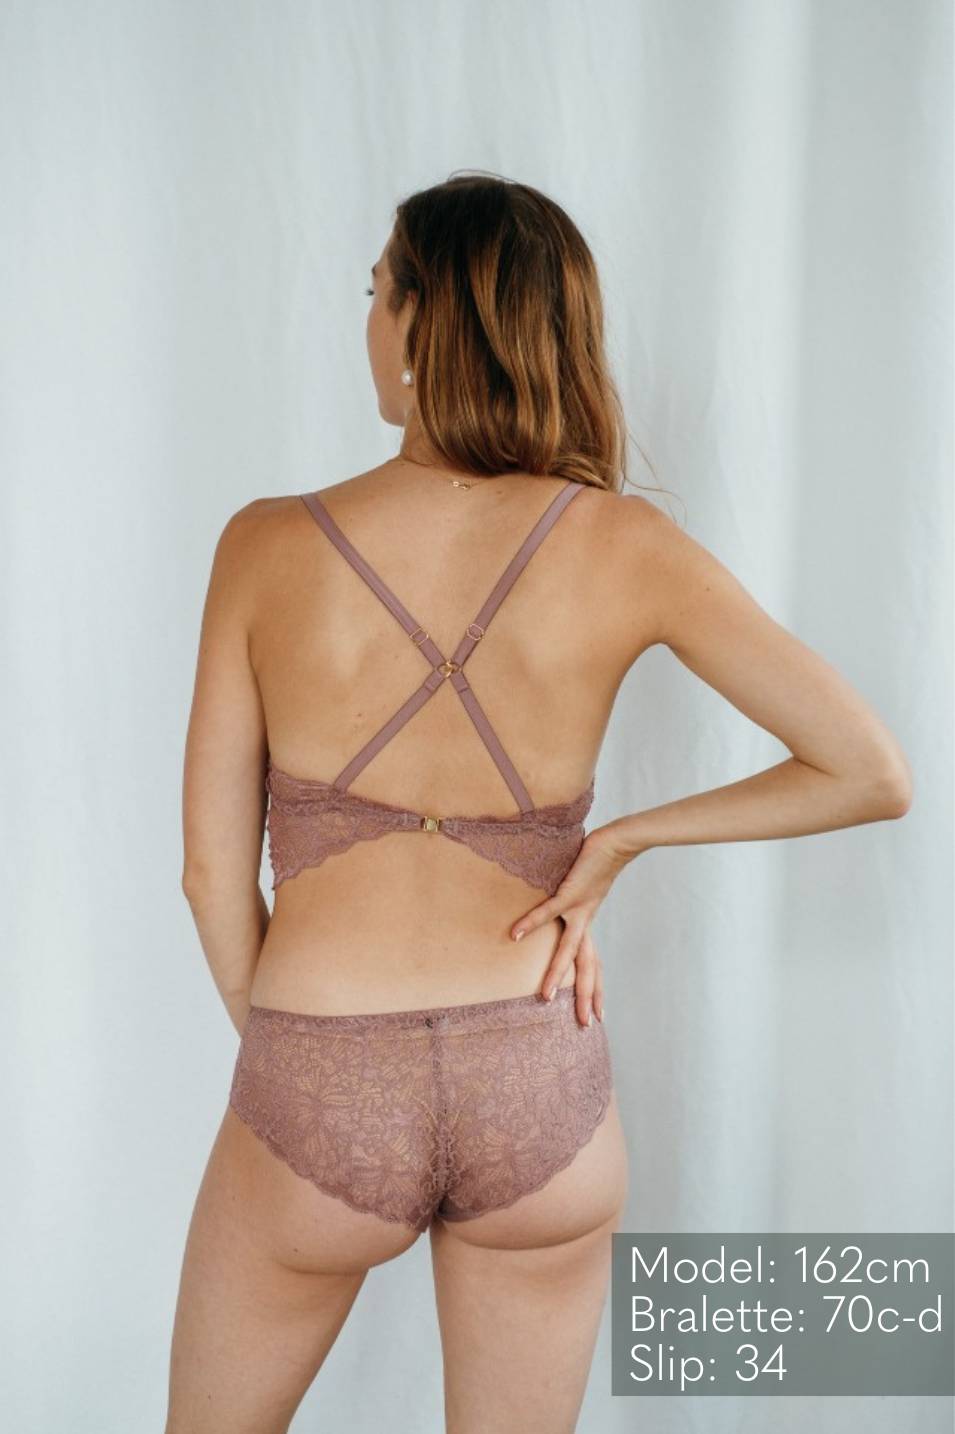 Model wears Bralette with crossed straps in smockey rose with matching slip.